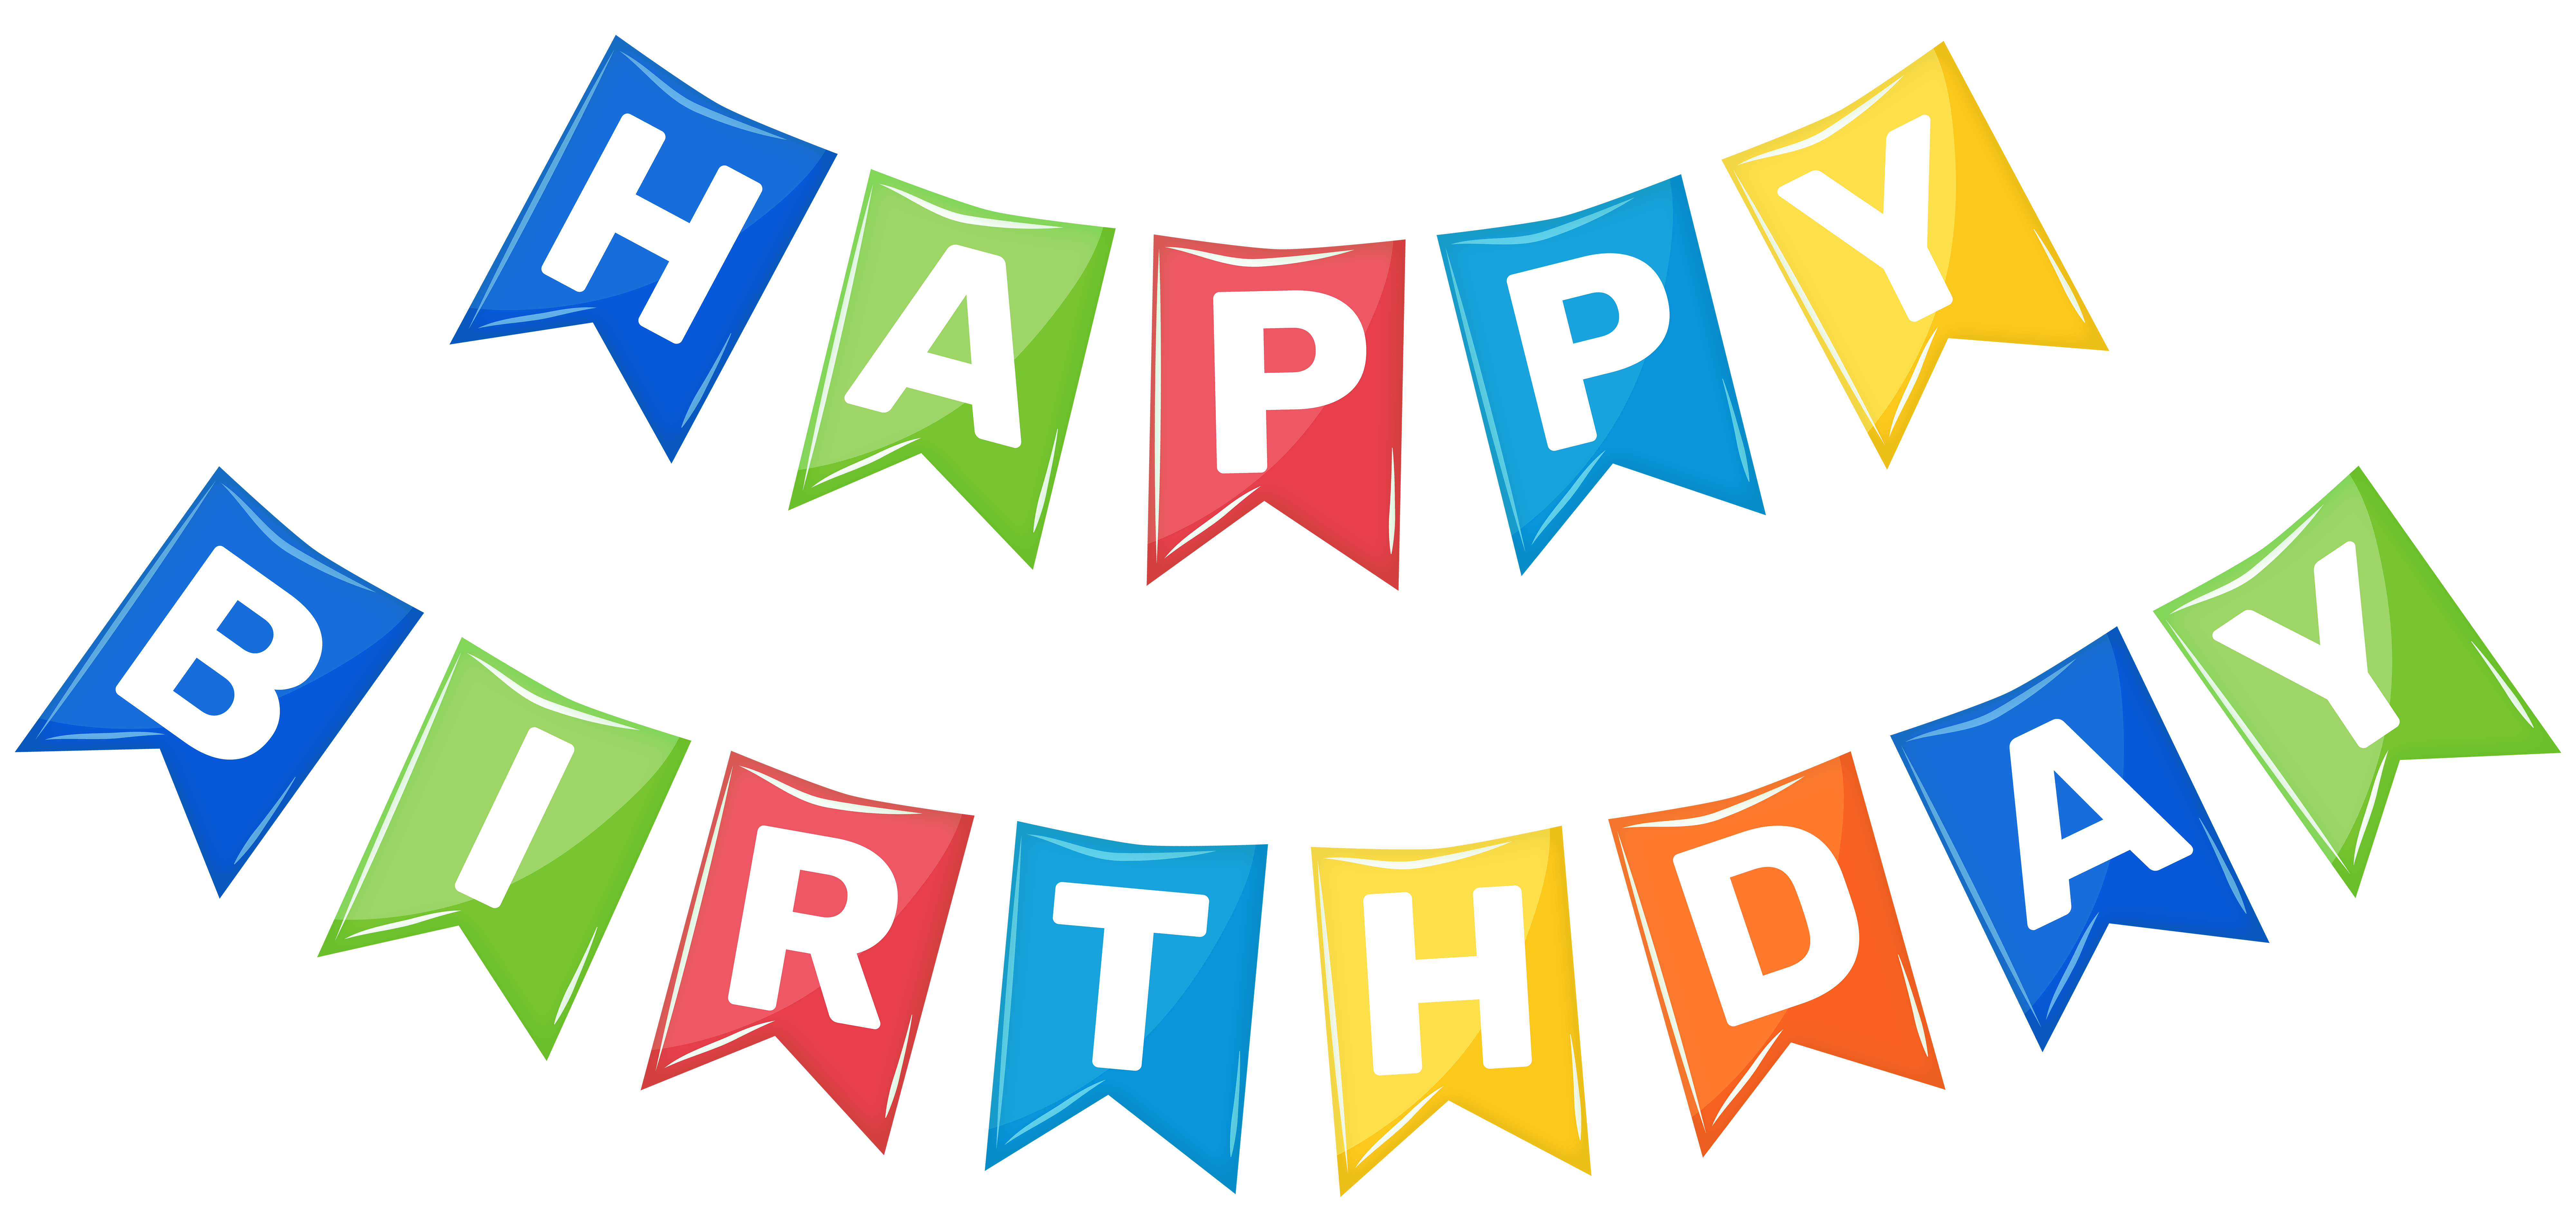 Happy Birthday Streamer PNG Clipart​  Gallery Yopriceville - High-Quality  Free Images and Transparent PNG Clipart